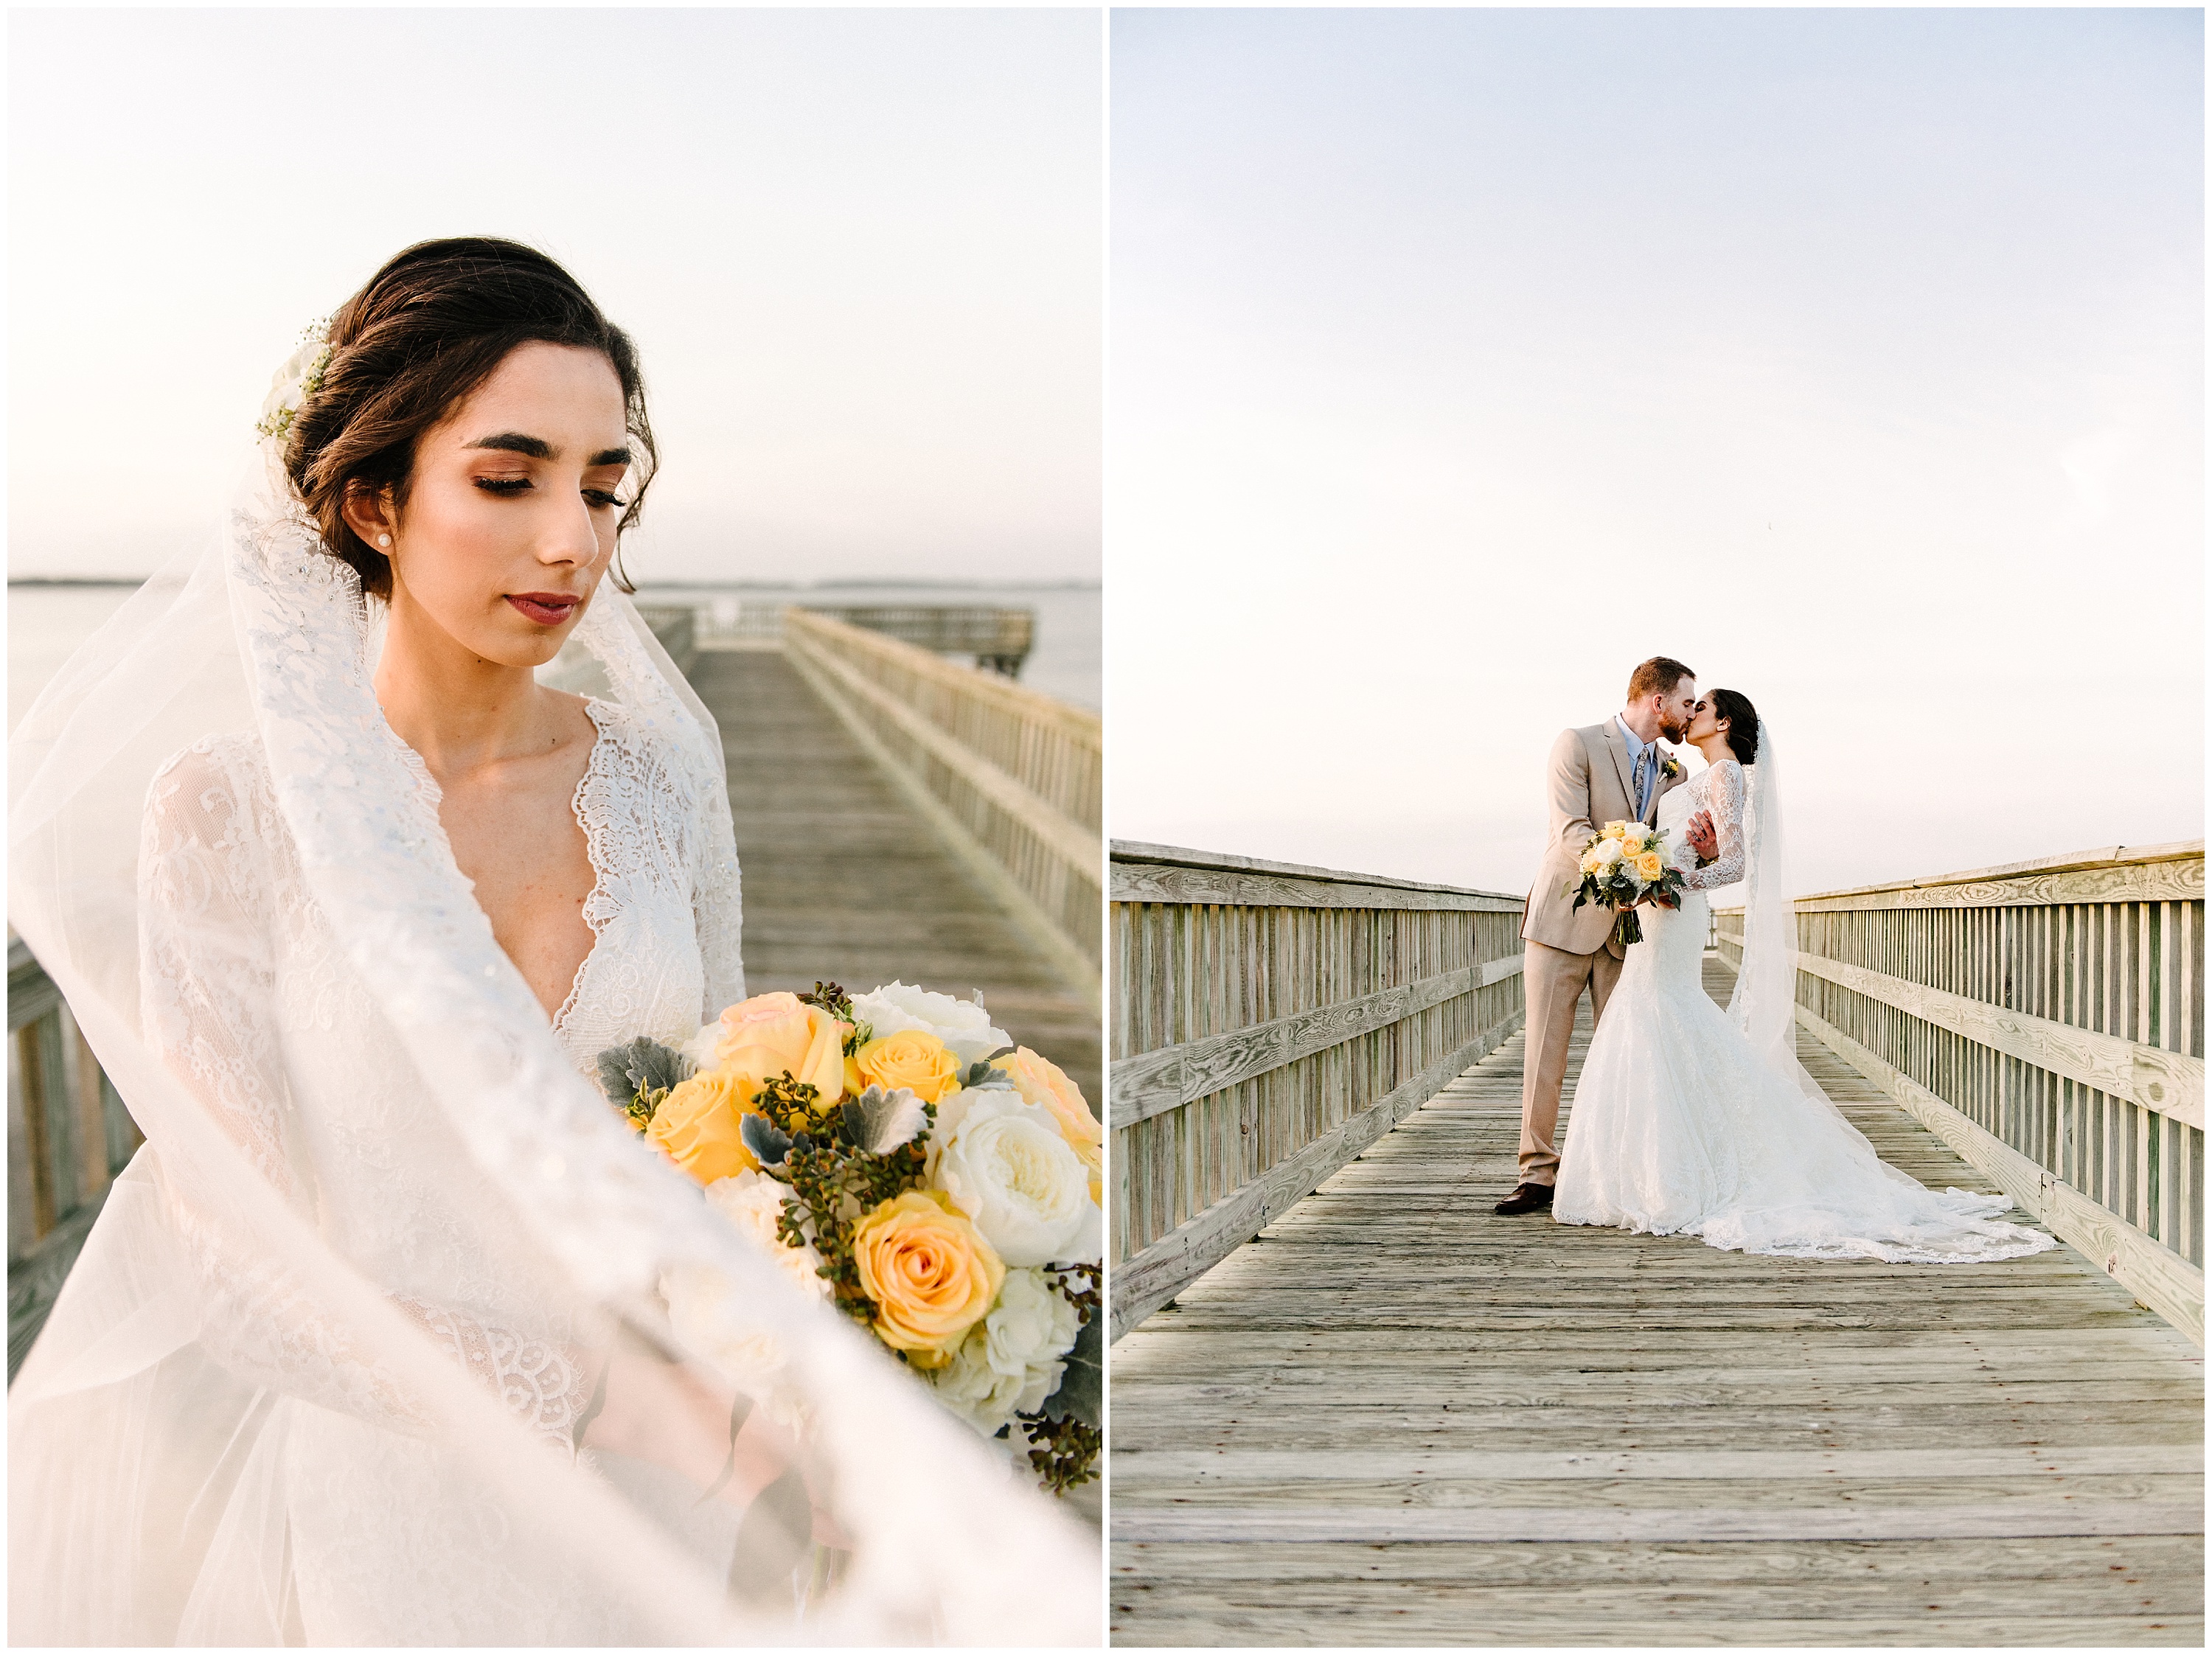 Wedding couple at Holts Landing State Park